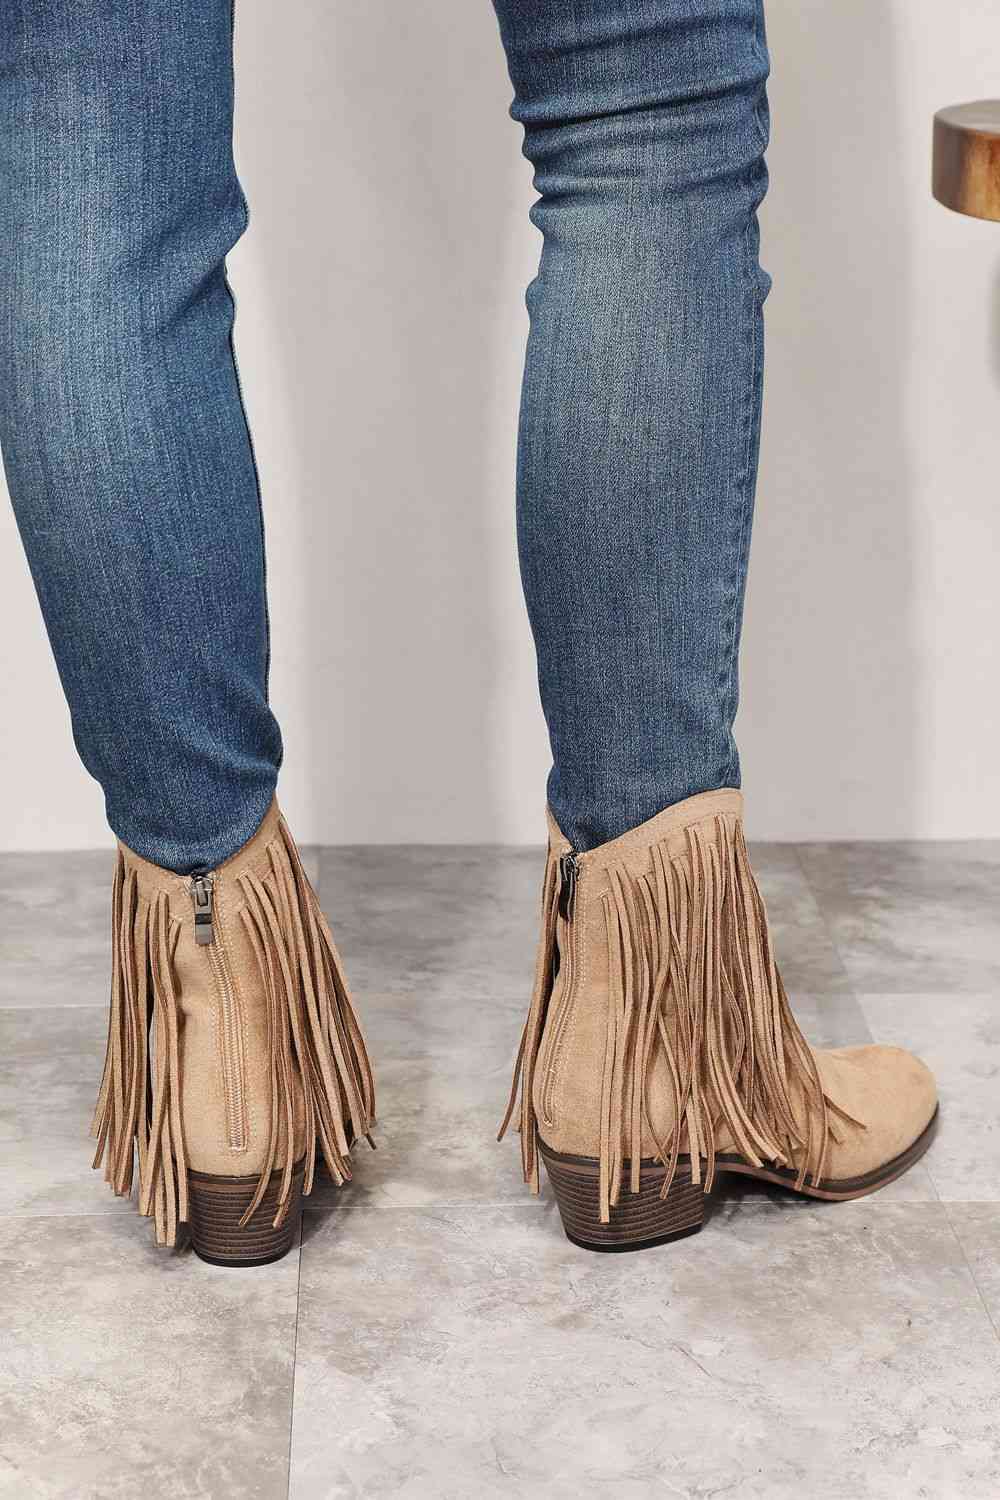 A person stands wearing blue jeans and beige Trendsi Legend Women's Fringe Cowboy Western Ankle Boots on a tiled floor.